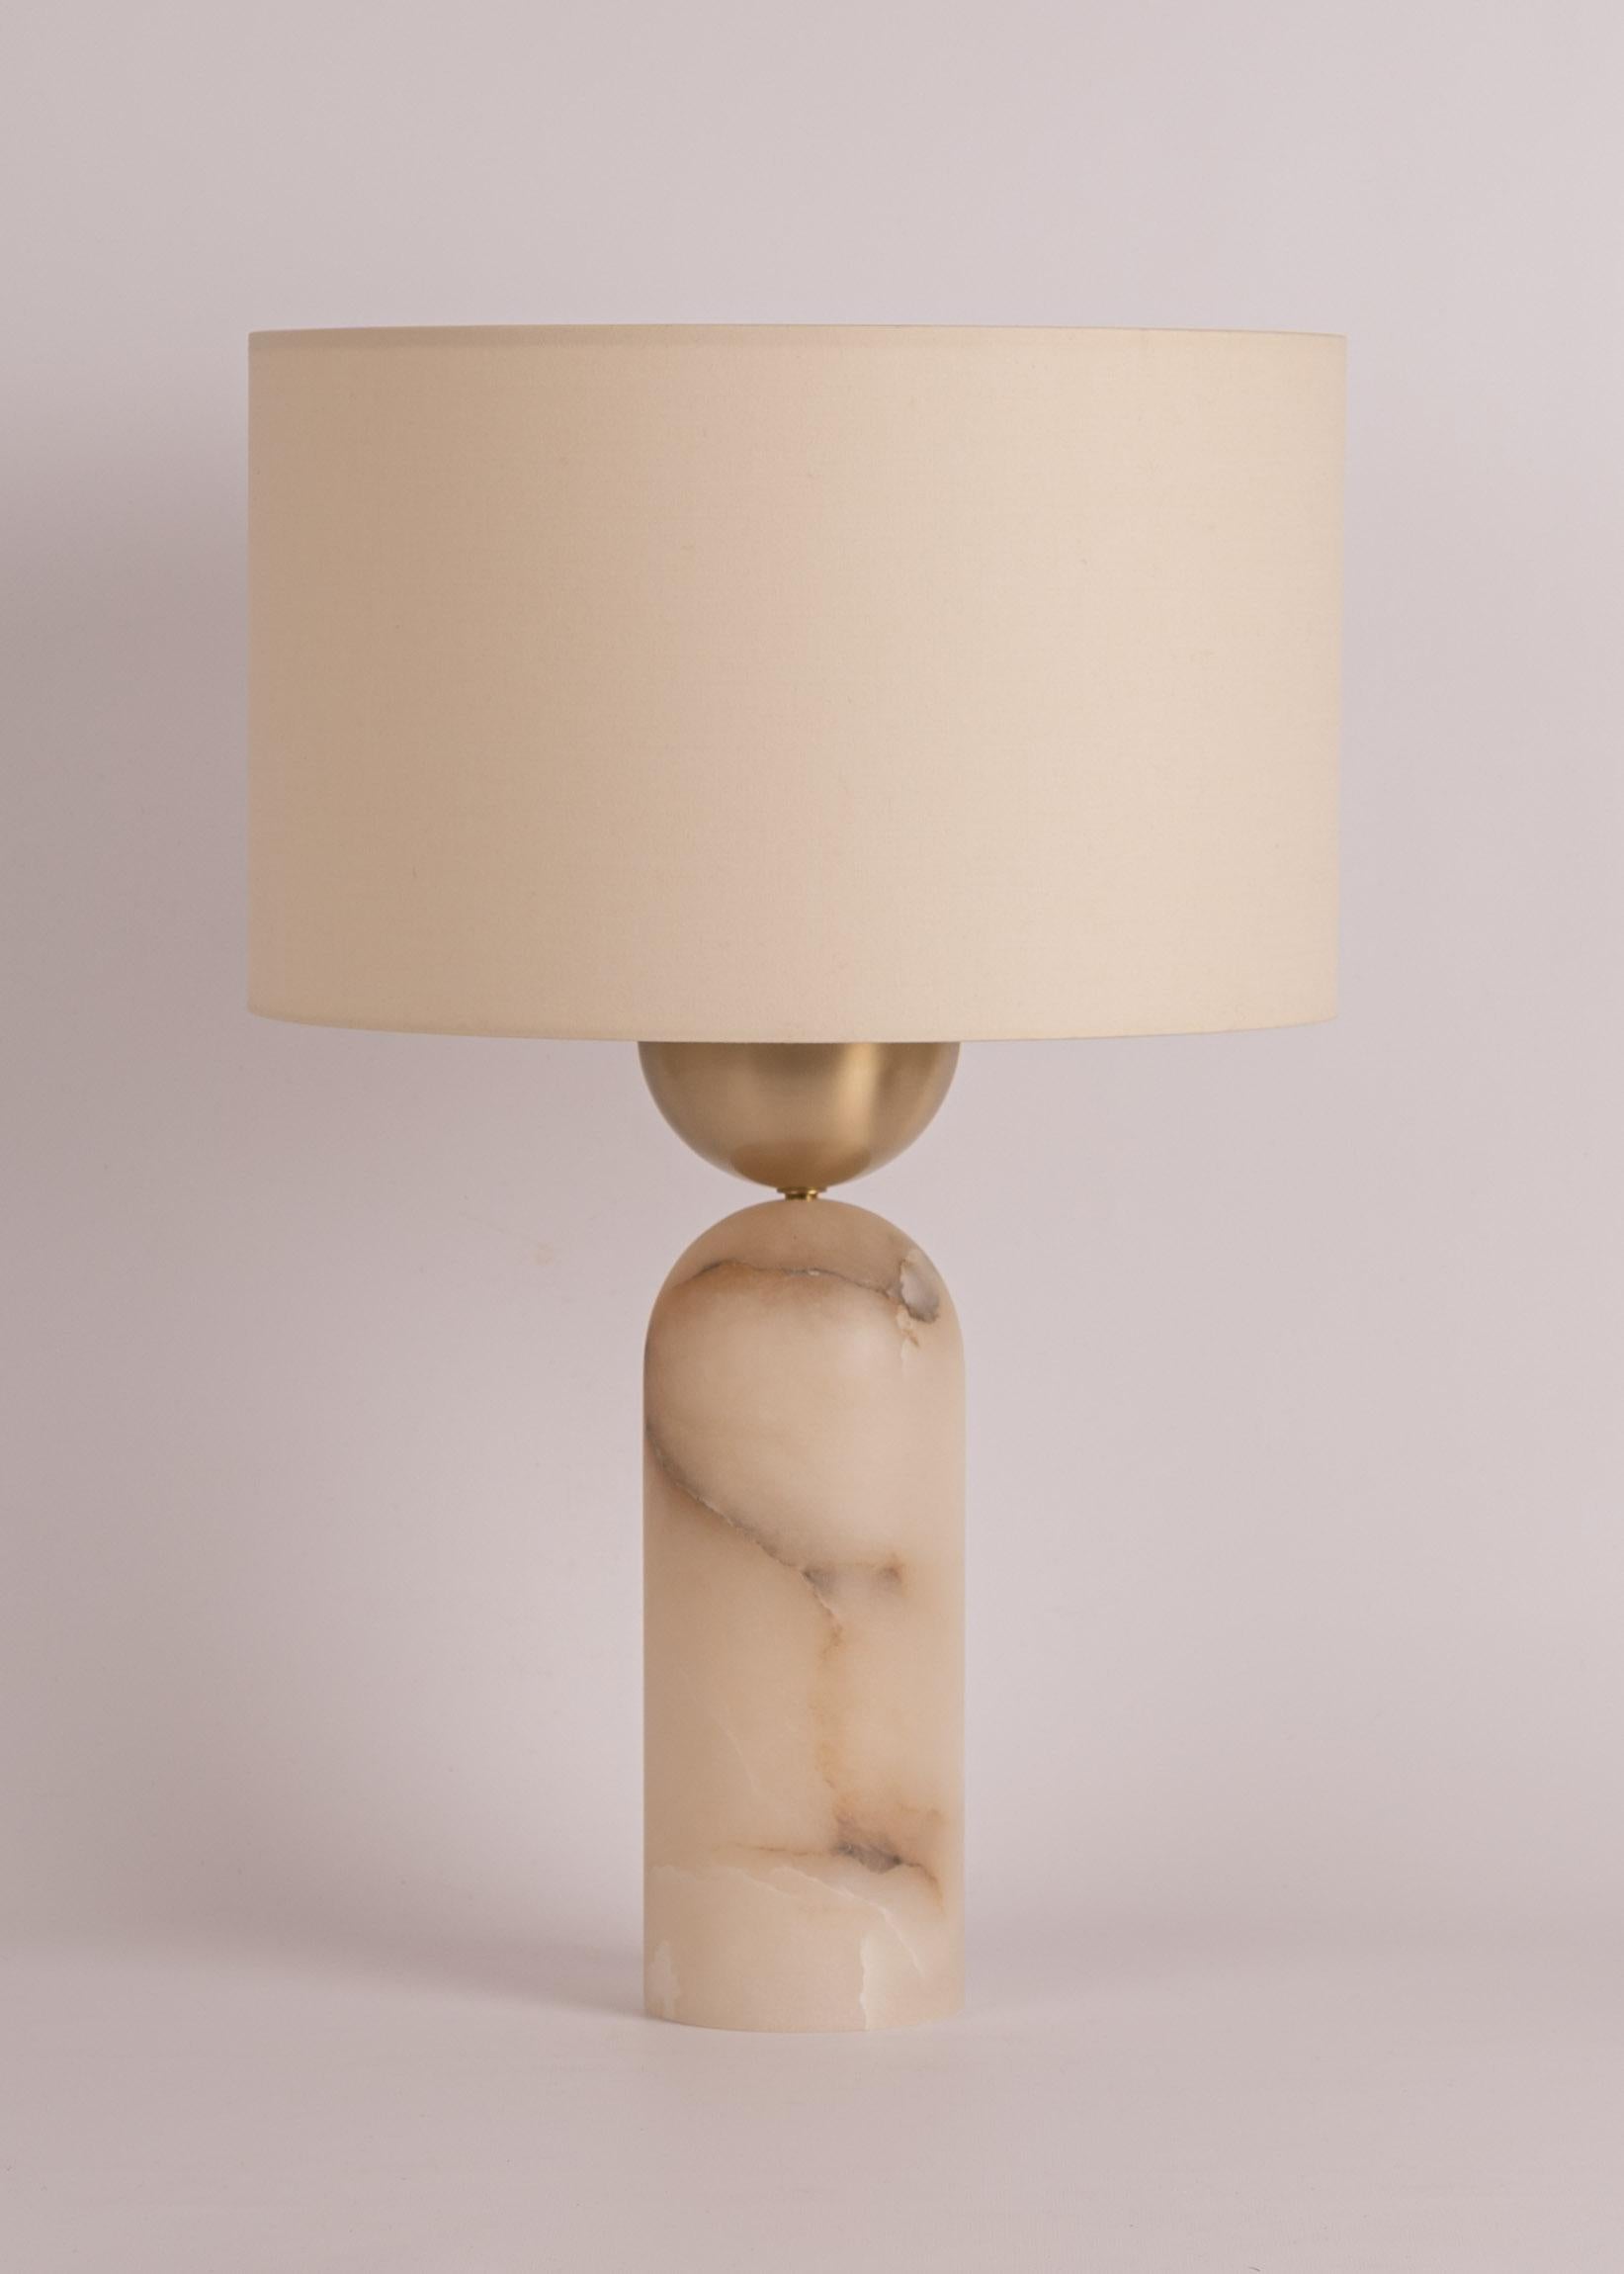 White Alabaster Peona Table Lamp by Simone & Marcel
Dimensions: Ø 40 x H 61 cm.
Materials: Brass, cotton and white alabaster.

Also available in different marble, wood and alabaster options and finishes. Custom options available on request. Please